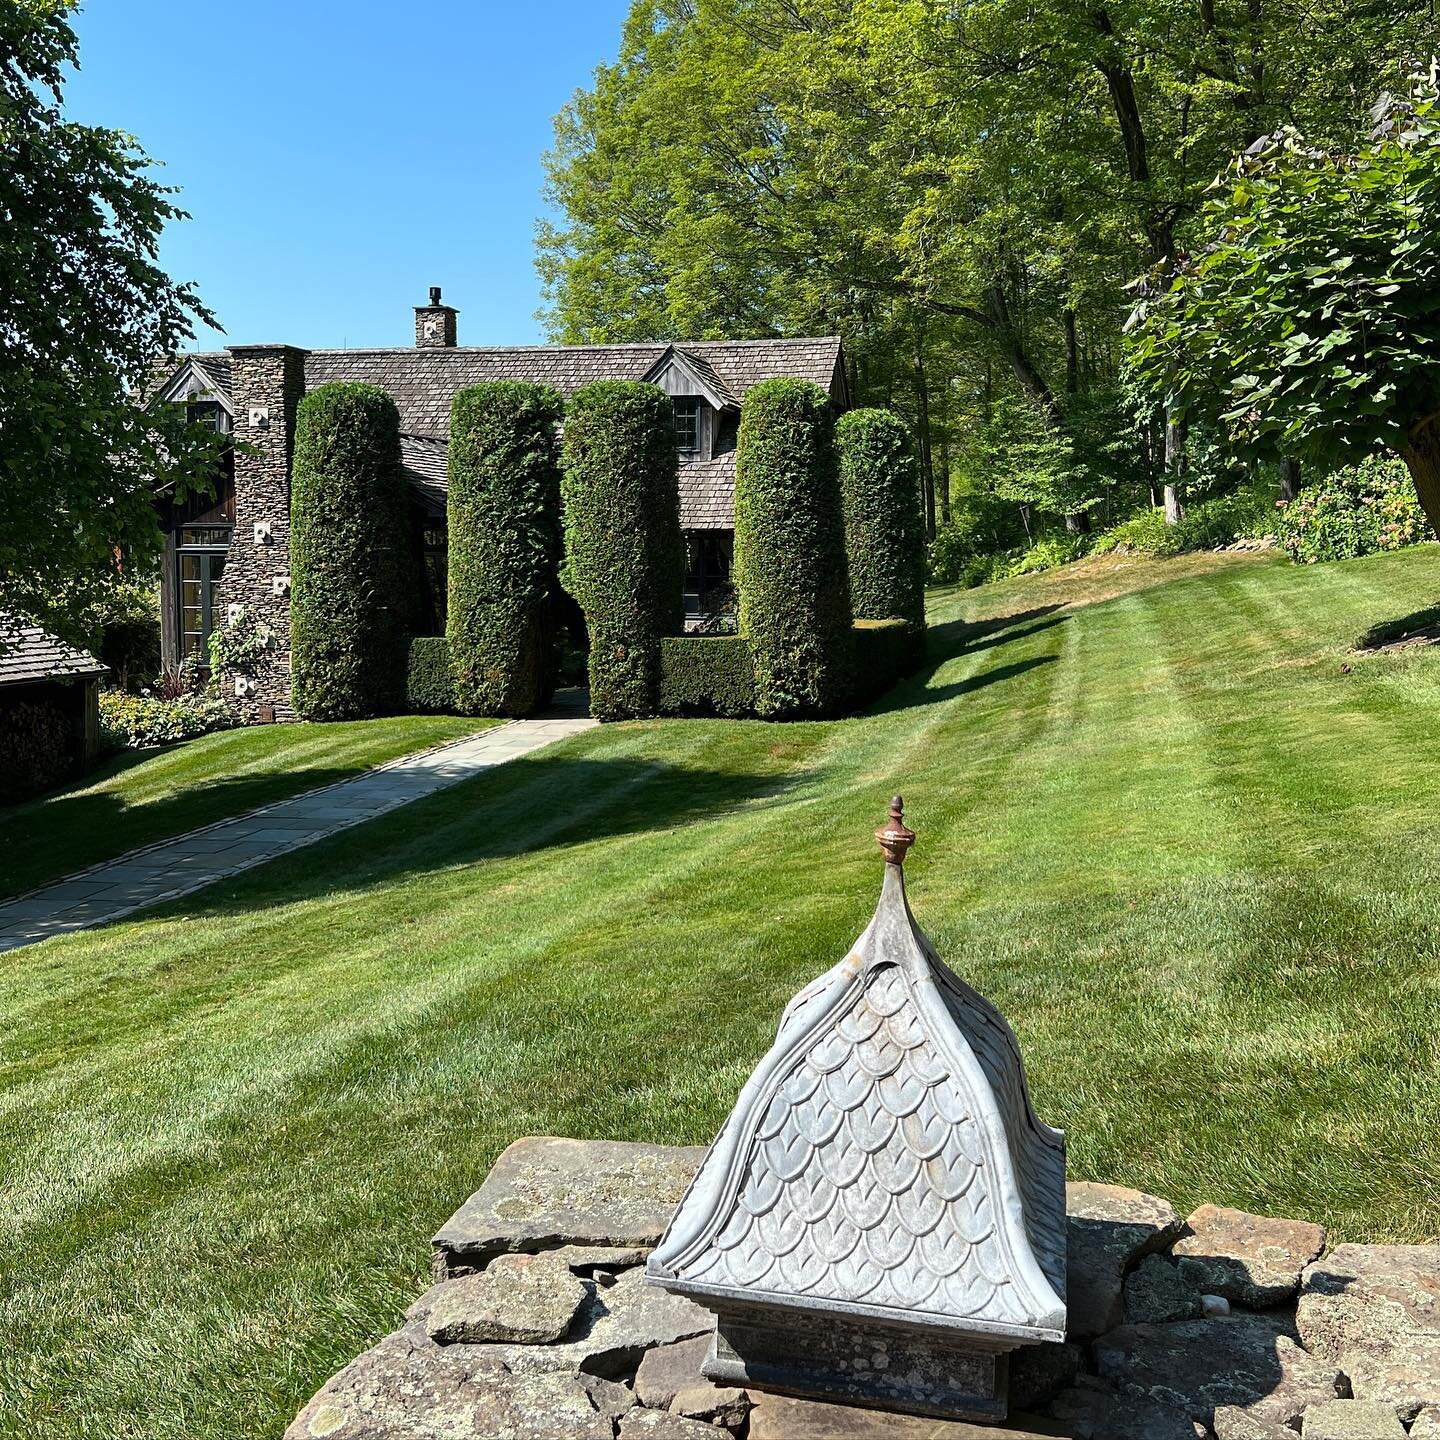 More beautiful gardens and vistas in NW Connecticut. Many thanks to our gracious hostesses. 💕
&hellip;..
#gardentours #littlegardenclubofmemphis #lgcgardenhop